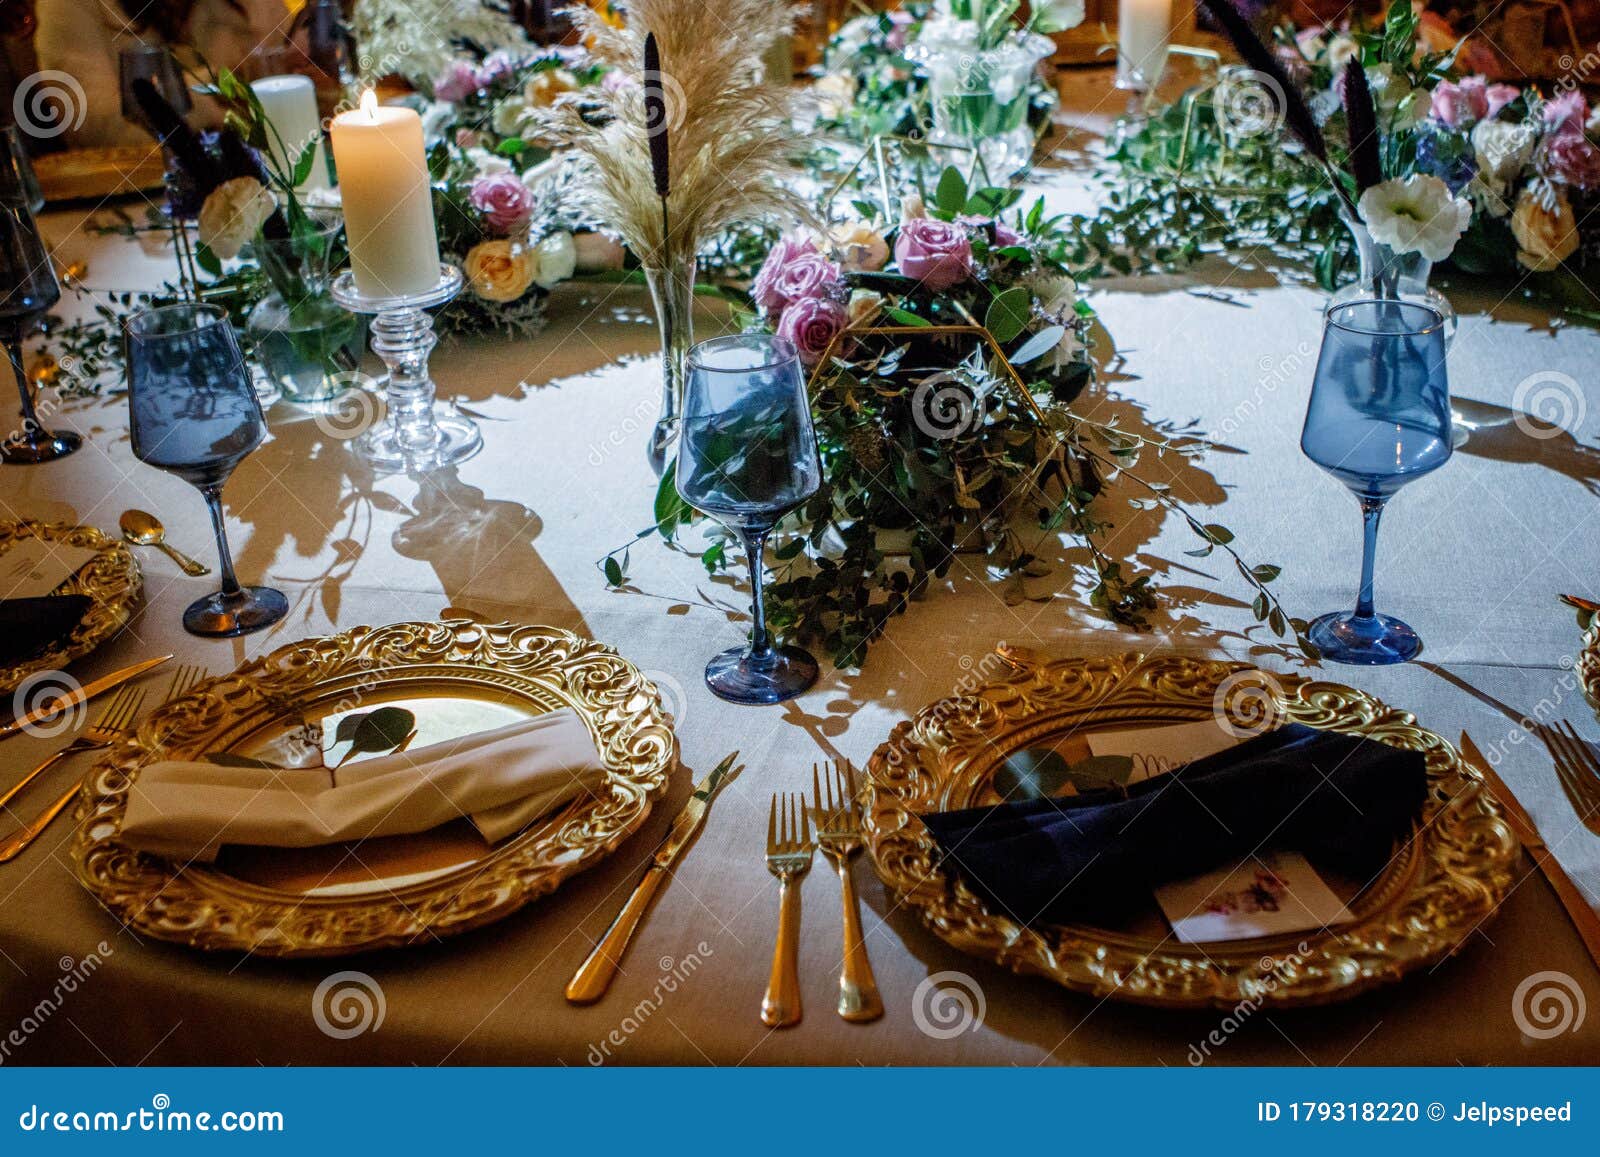 luxury table flower green decoration with blue glass globets wedding event party at night, coctel table with candles